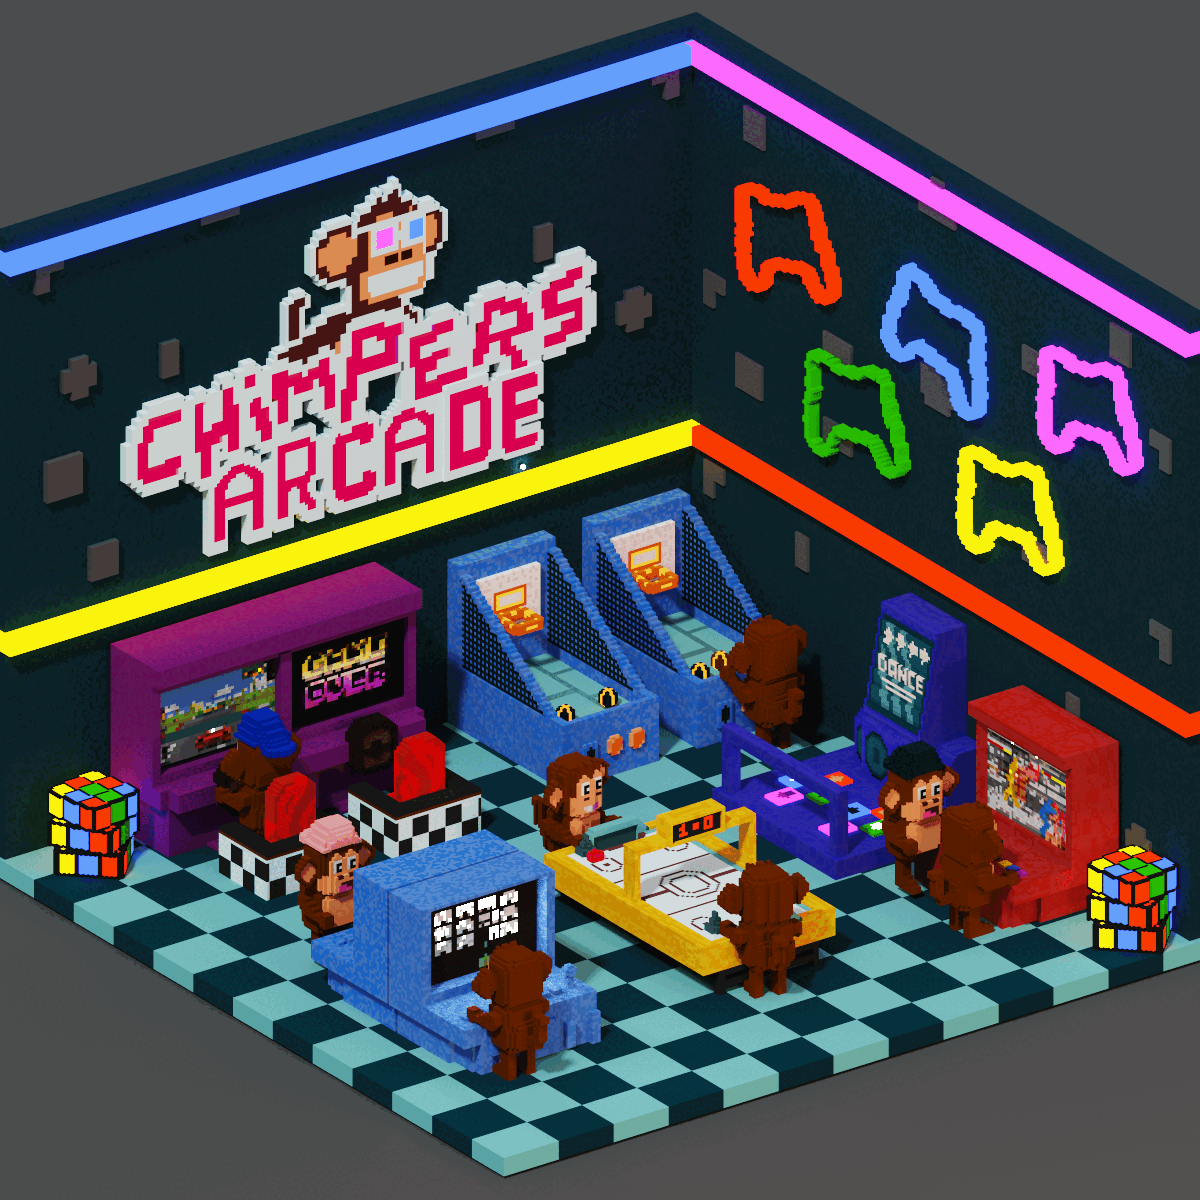 Chimpers Arcade